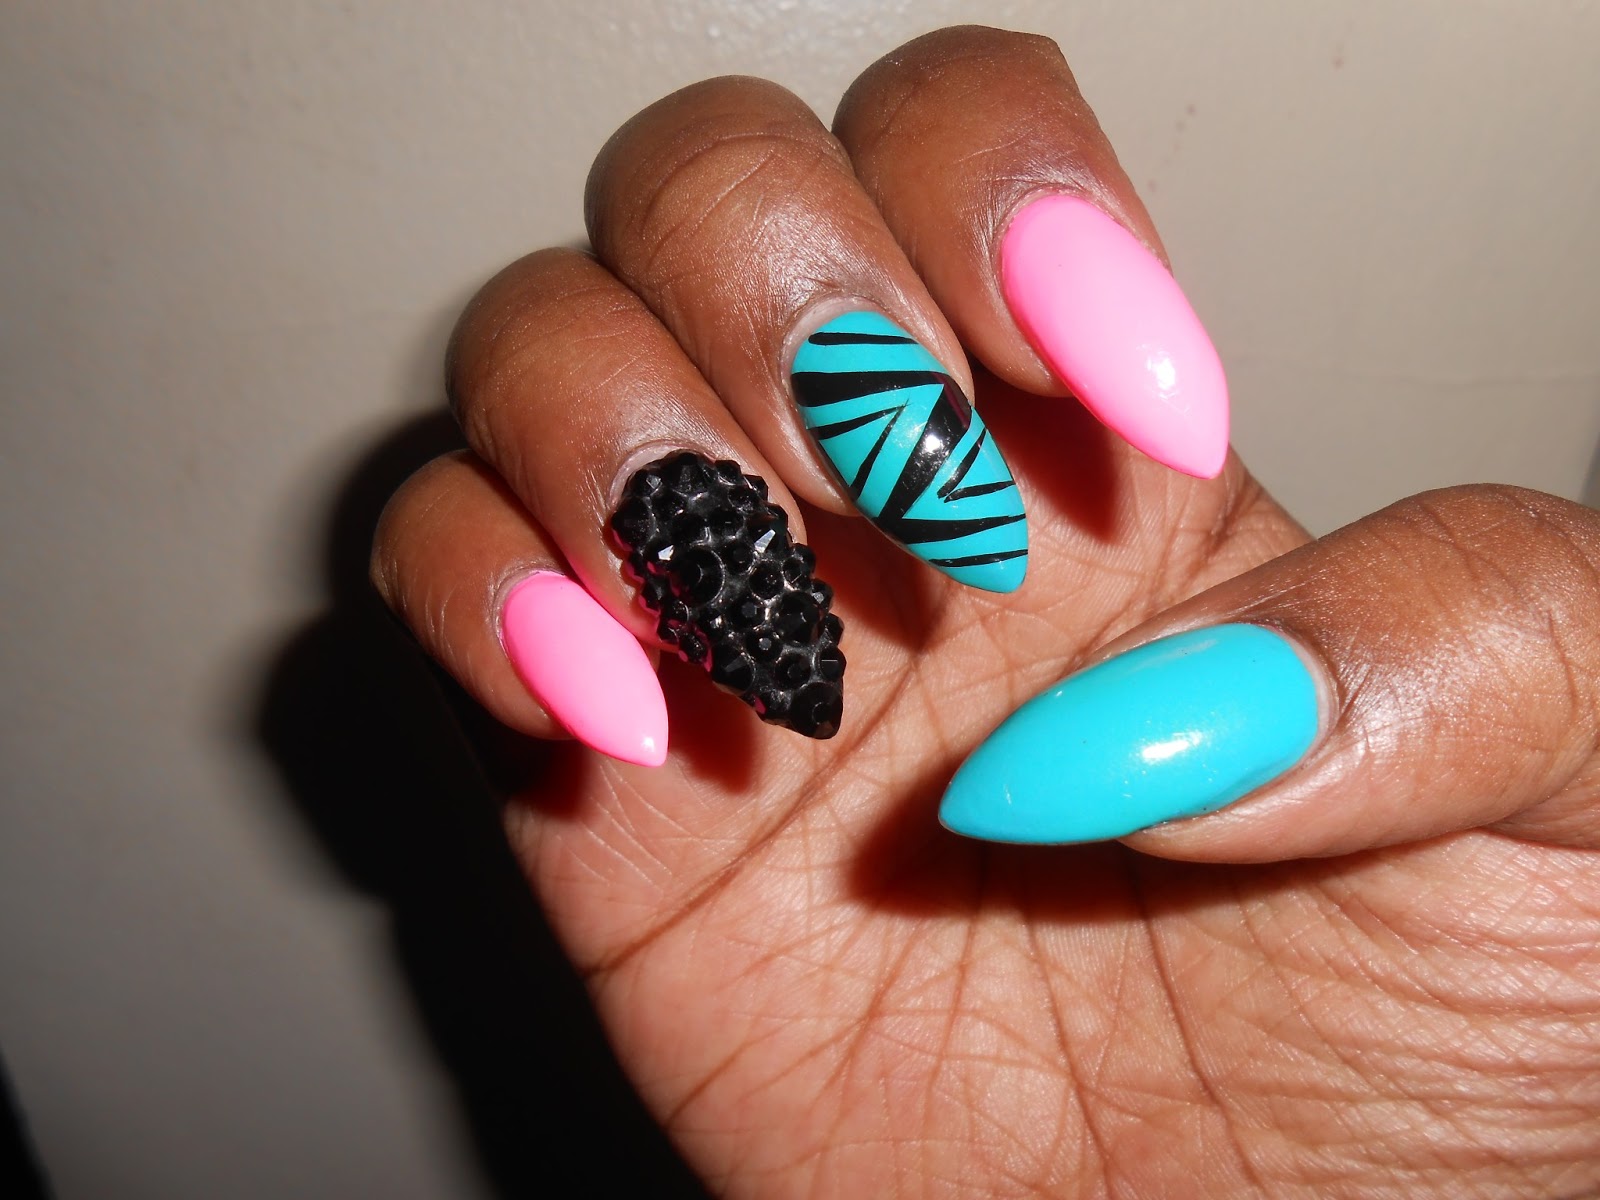 2. "30+ Stiletto Nail Designs to Try This November" - wide 8